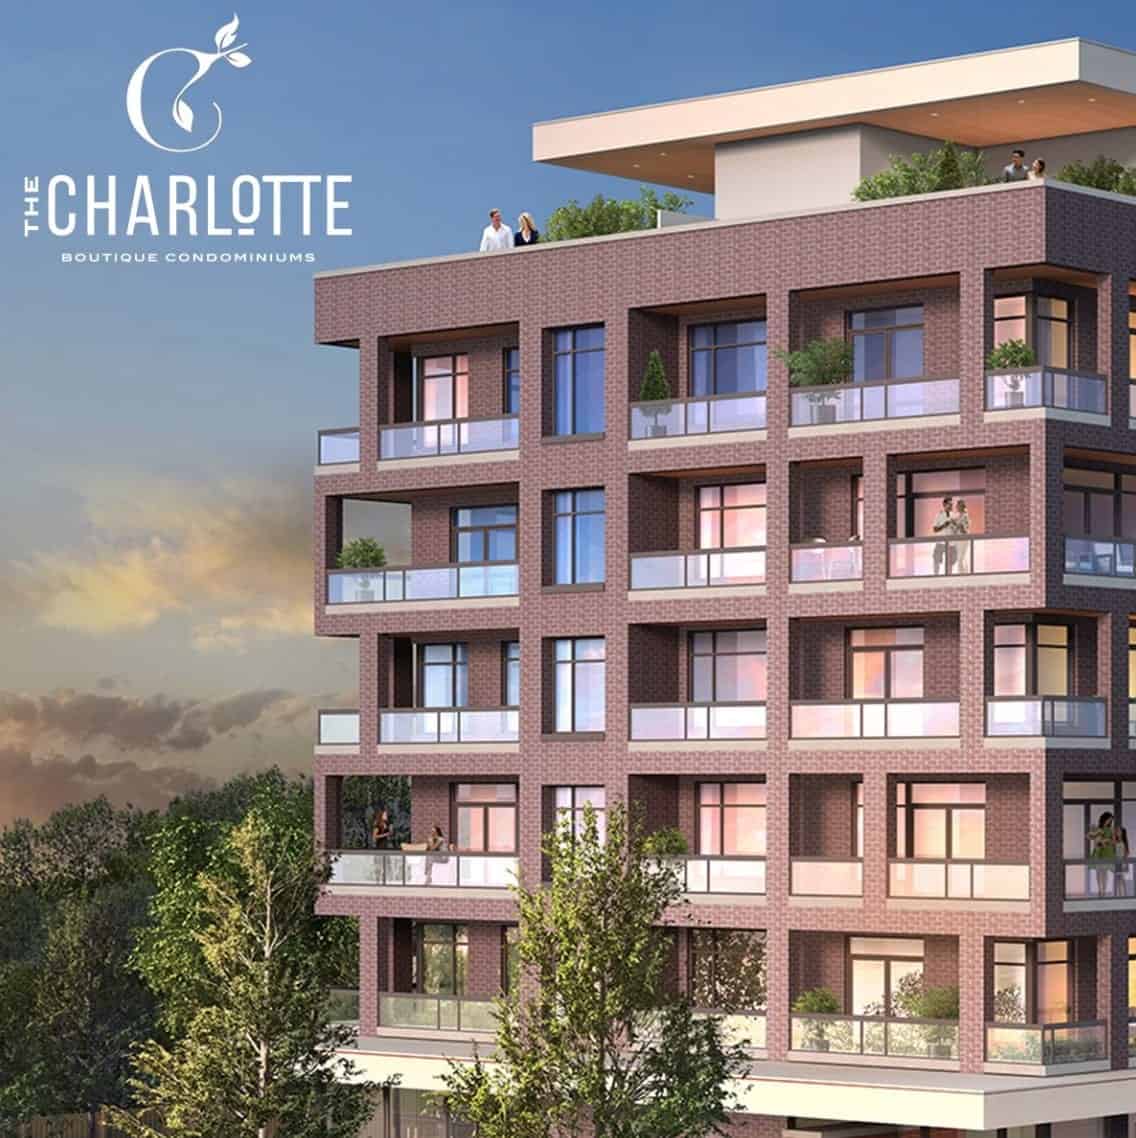 The Charlotte Condos Whitby Building Rendering Image True Condos